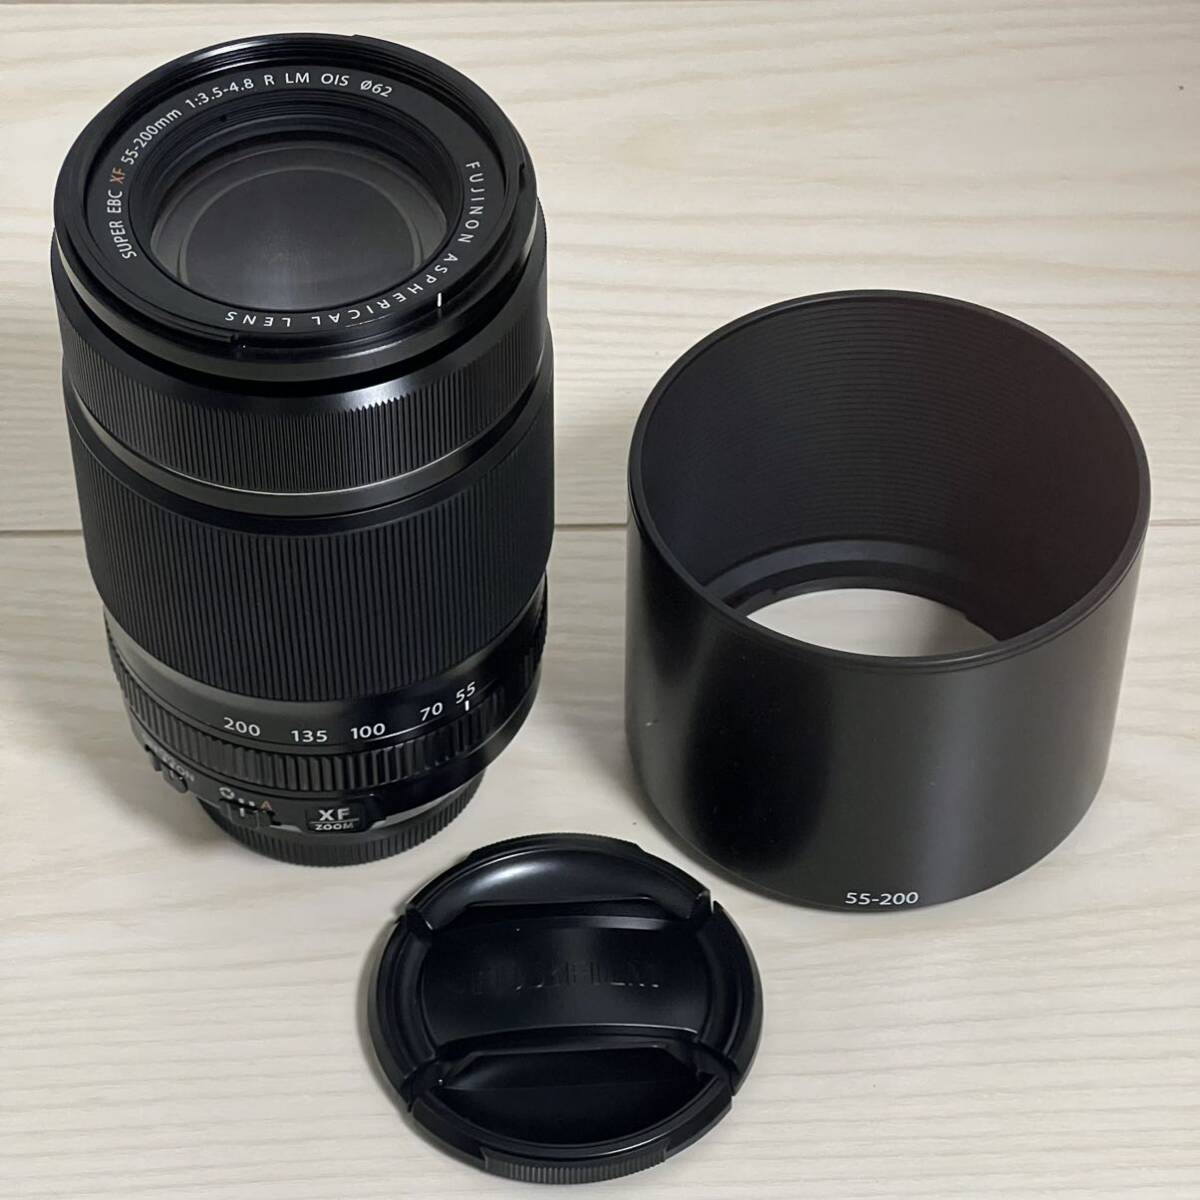 FUJIFILM XF55-200mmF3.5-4.8R LM OIS [ seeing at distance zoom lens Fuji non lens X mount ] almost unused new goods 